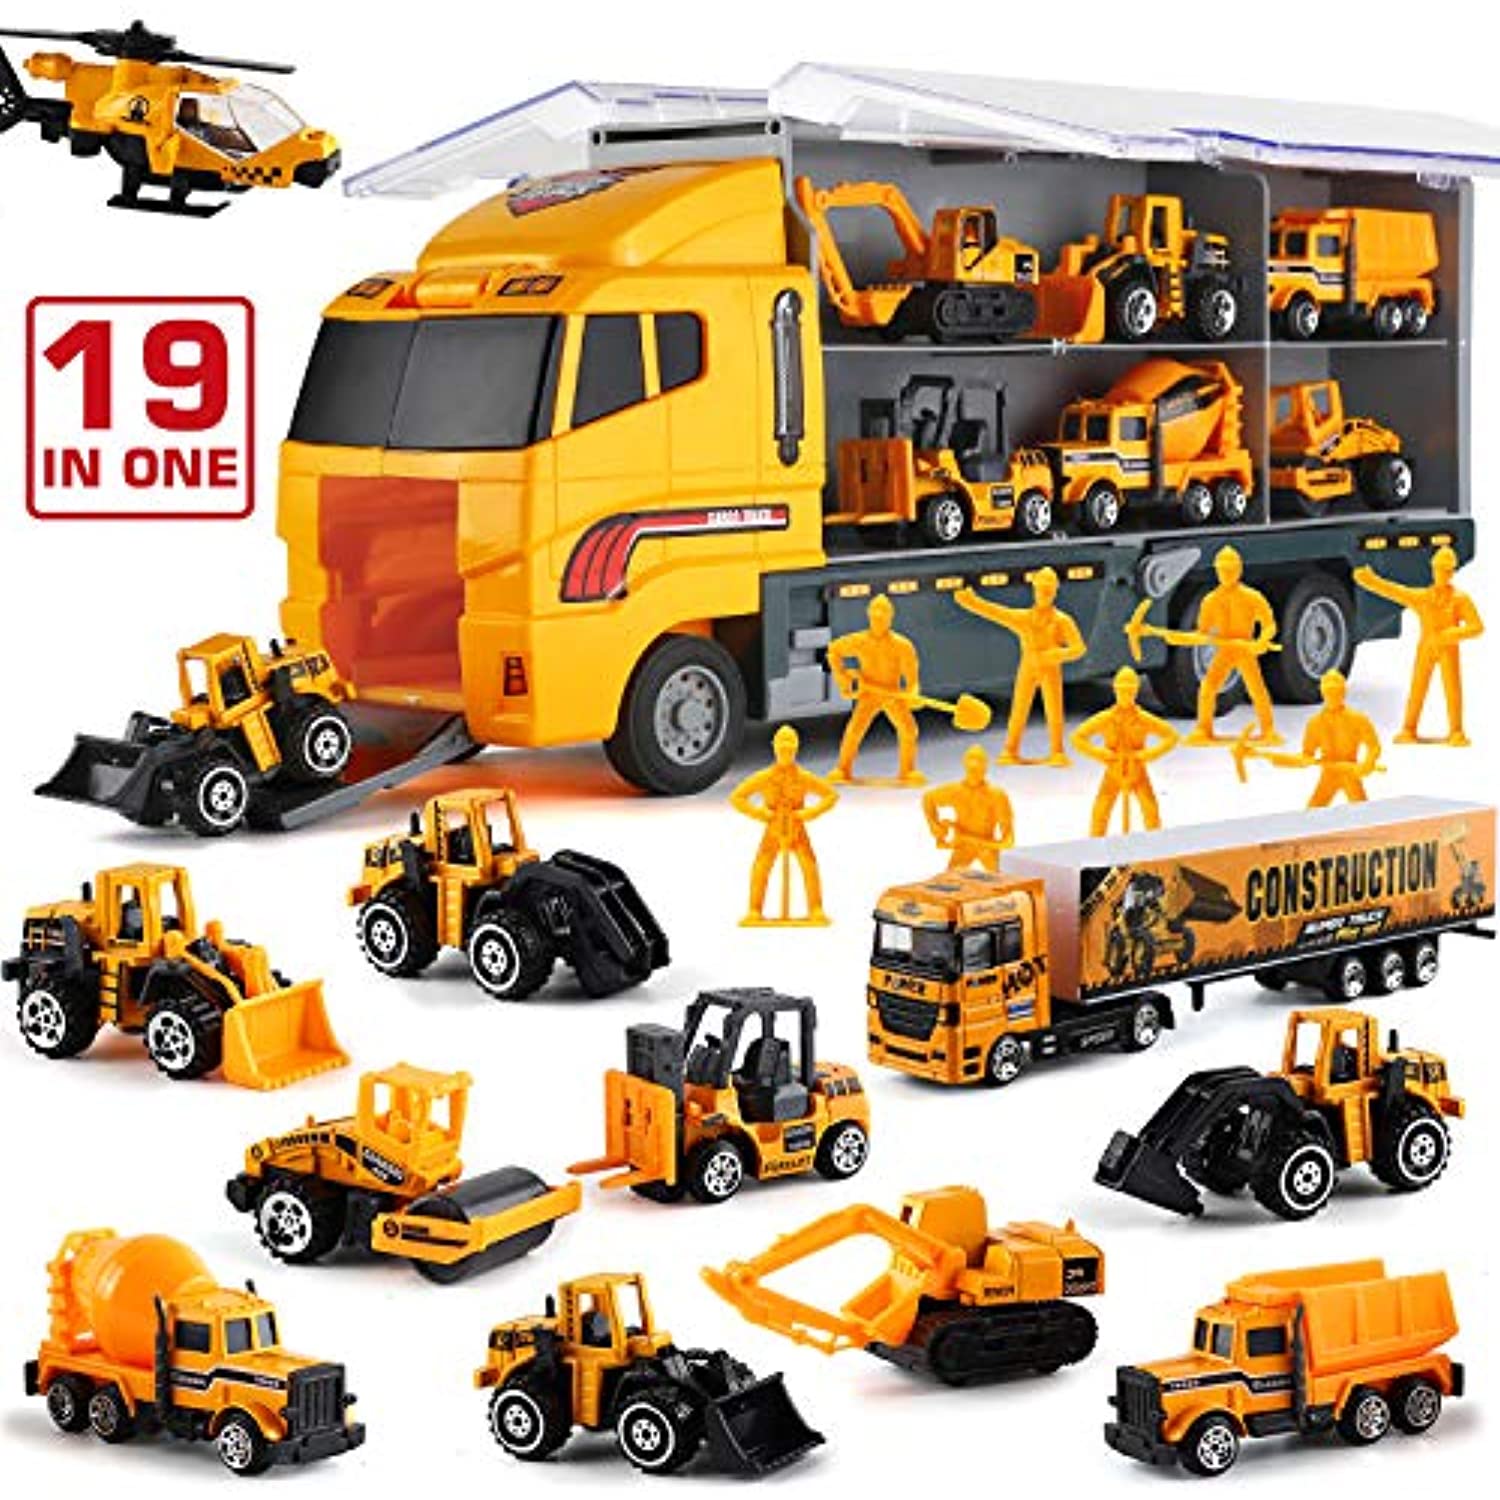 19 in 1 Construction Truck with Engineering Worker Toy Set, Mini Die-Cast Engine Car in Carrier Truck, Double Side Transport Vehicle Play for Child Kid Boy Girl Birthday Christmas Party Favors - image 1 of 7